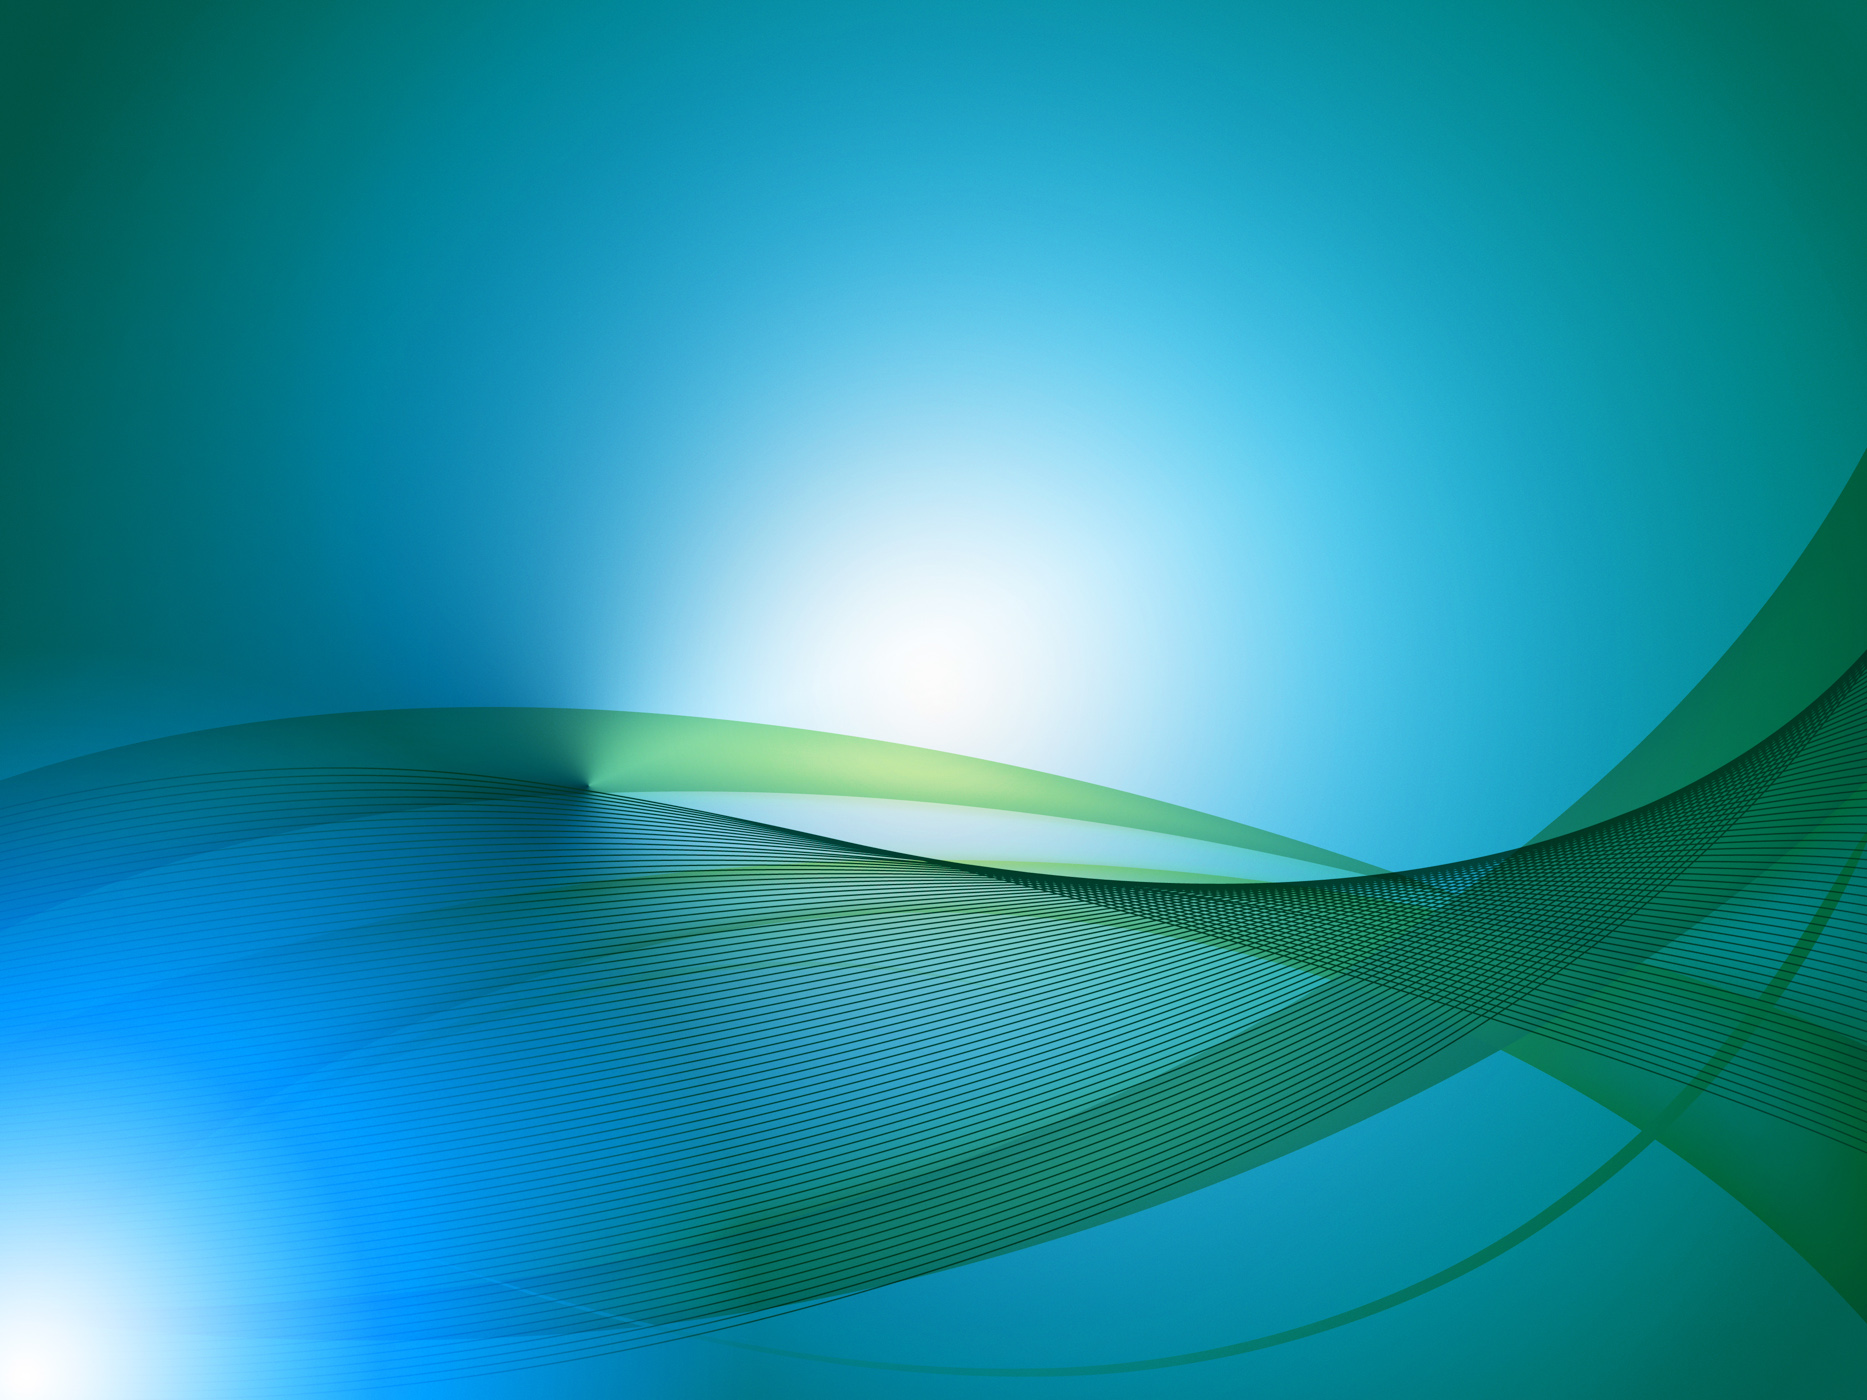 Wavy turquoise background means artistic design or digital art photo